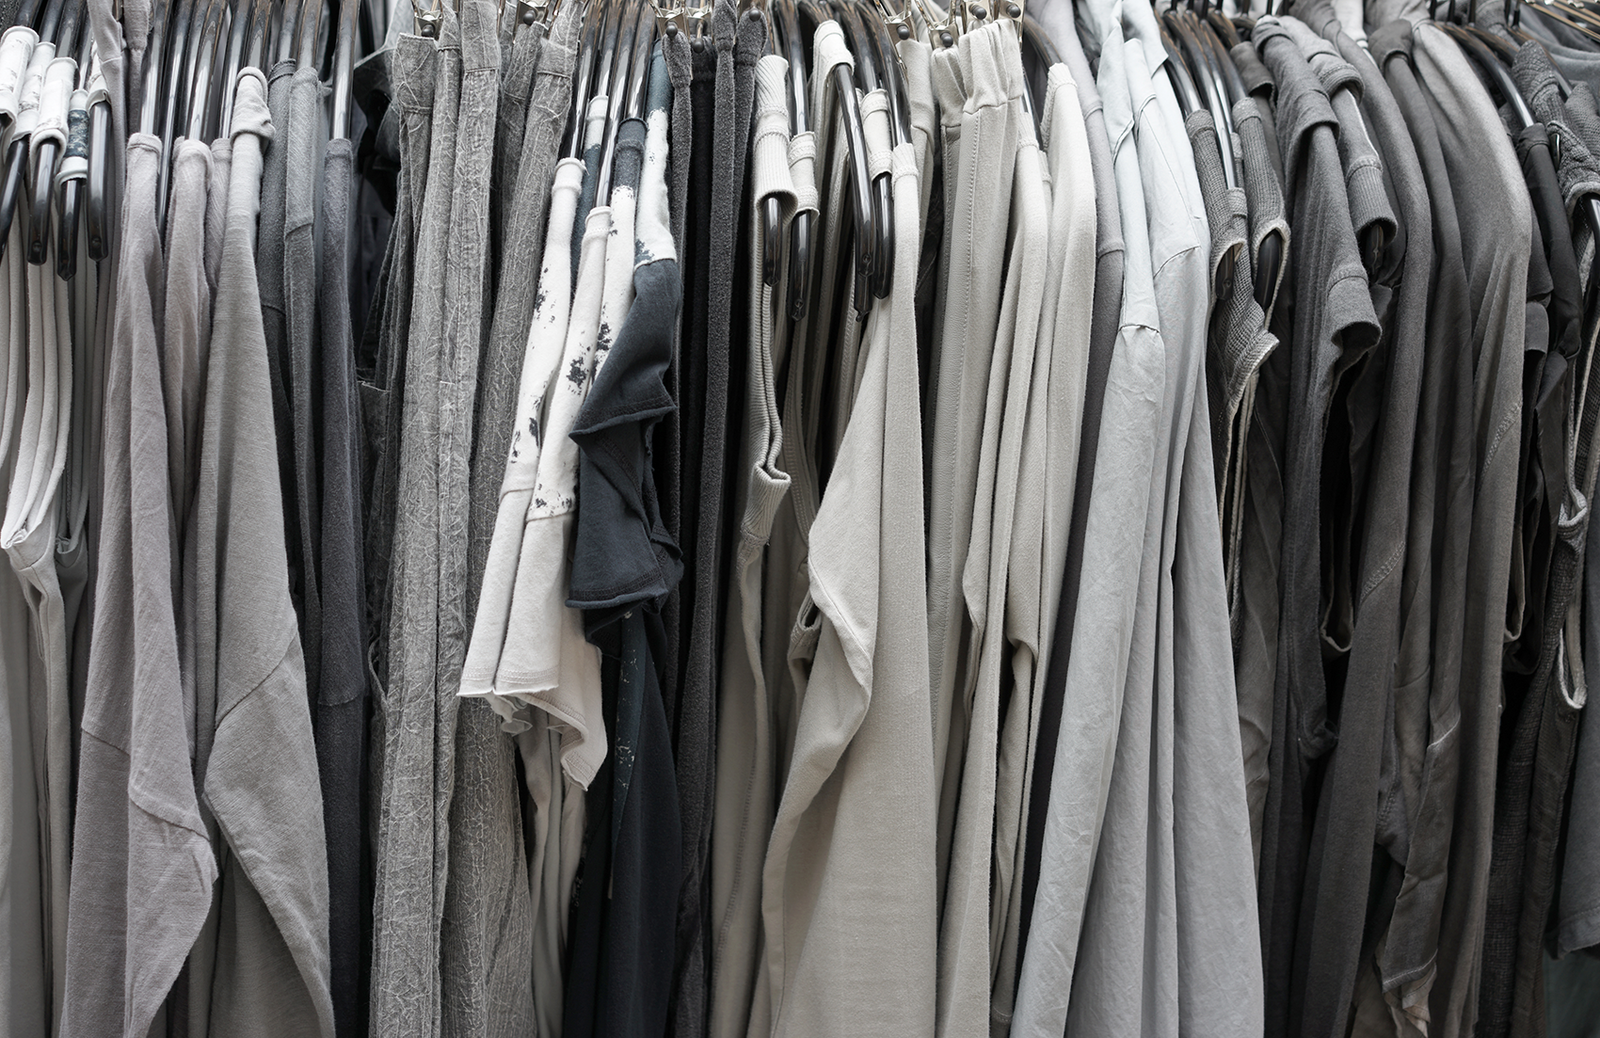 t-shirts hanging on a rack